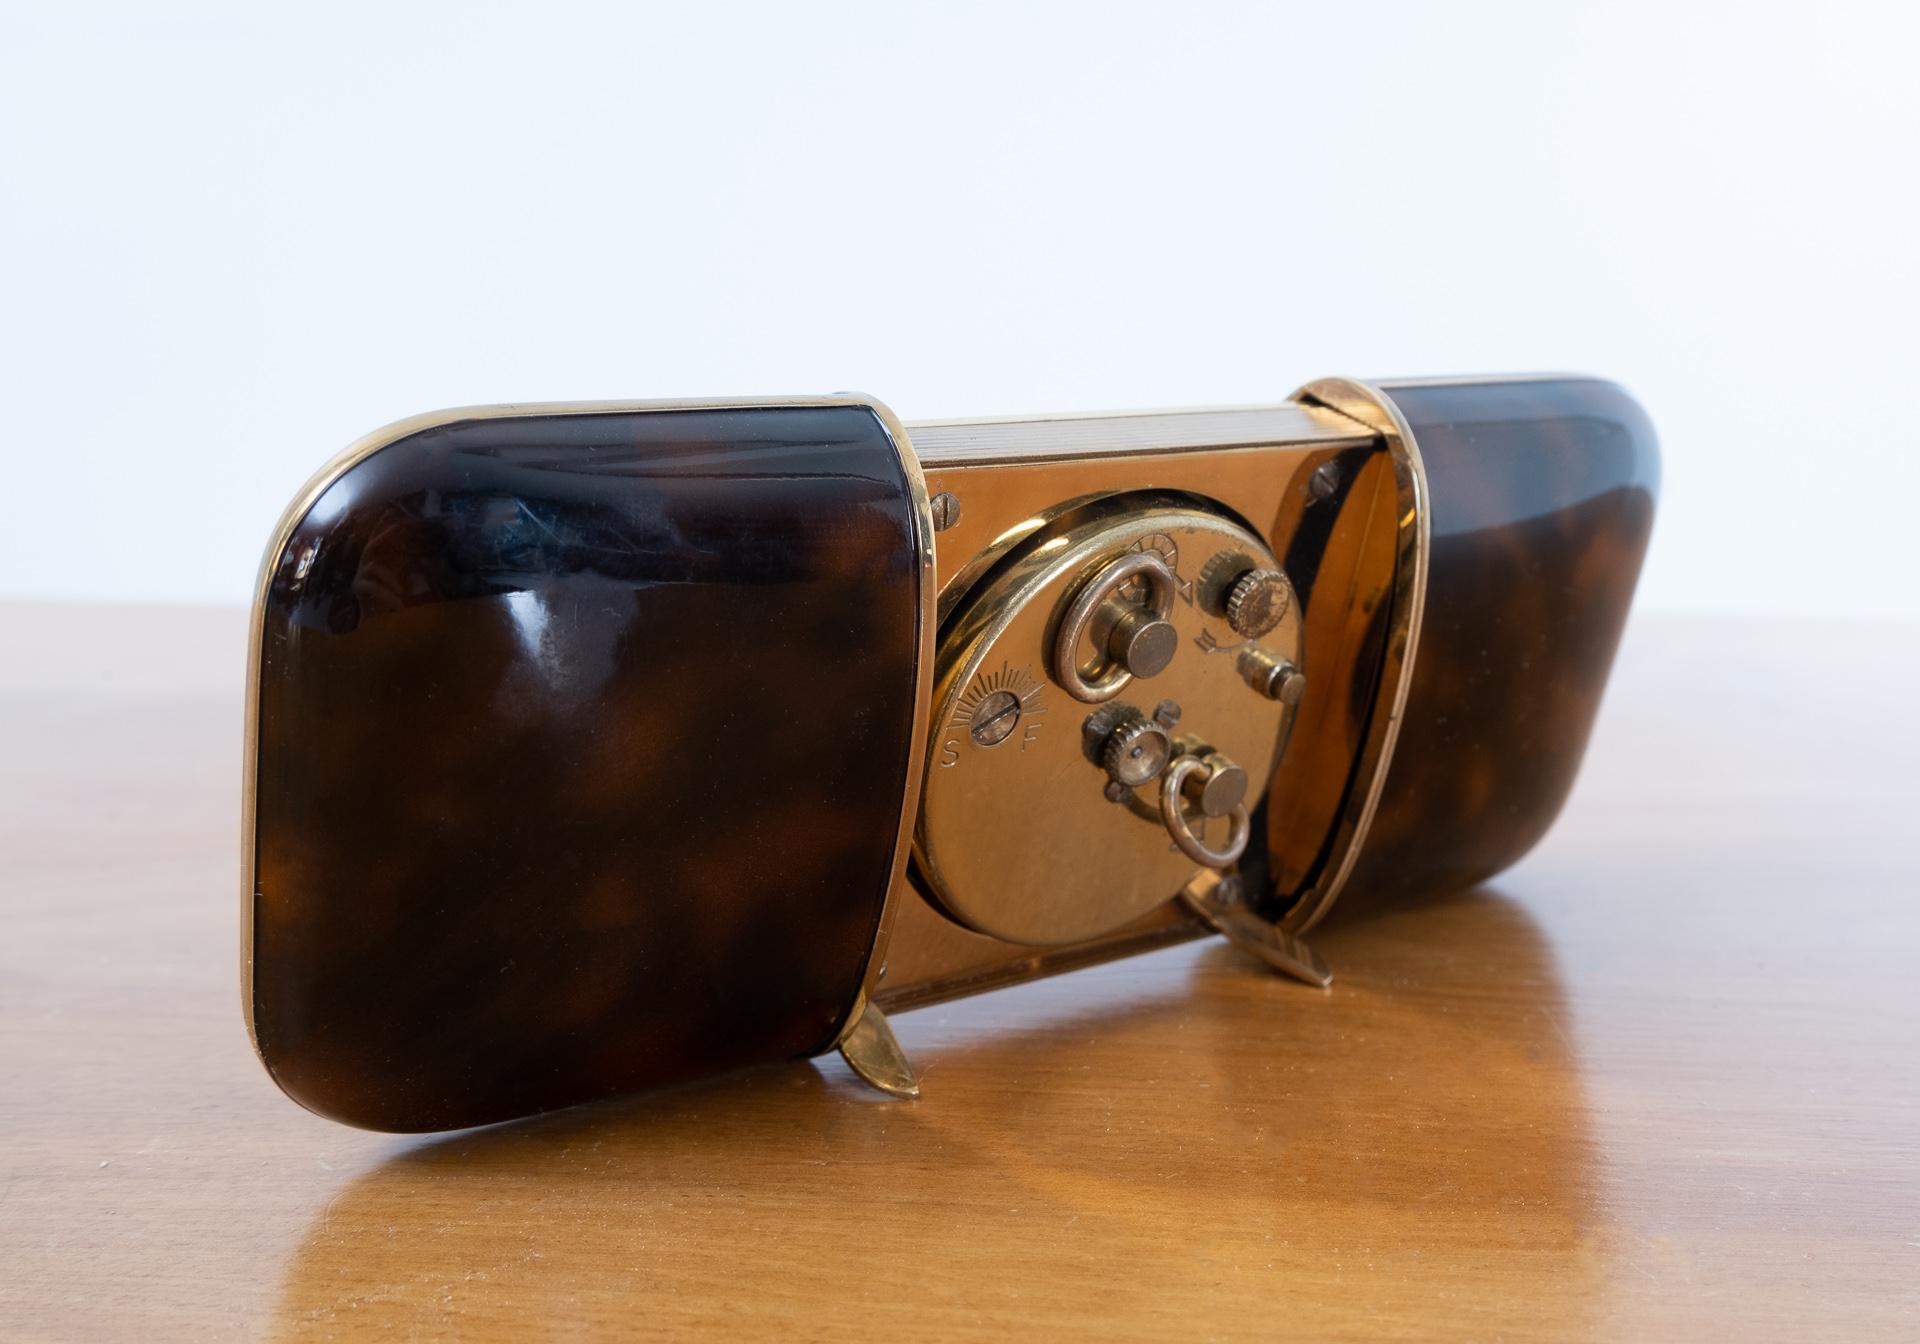 Art Deco Wuba Germany traveling or desk clock. Faux turtle shell case, comes with nice brass
details. When slide open automatically its little standards click out. One-day clockwork. Alarm clock everything in good working condition.
Lovely and